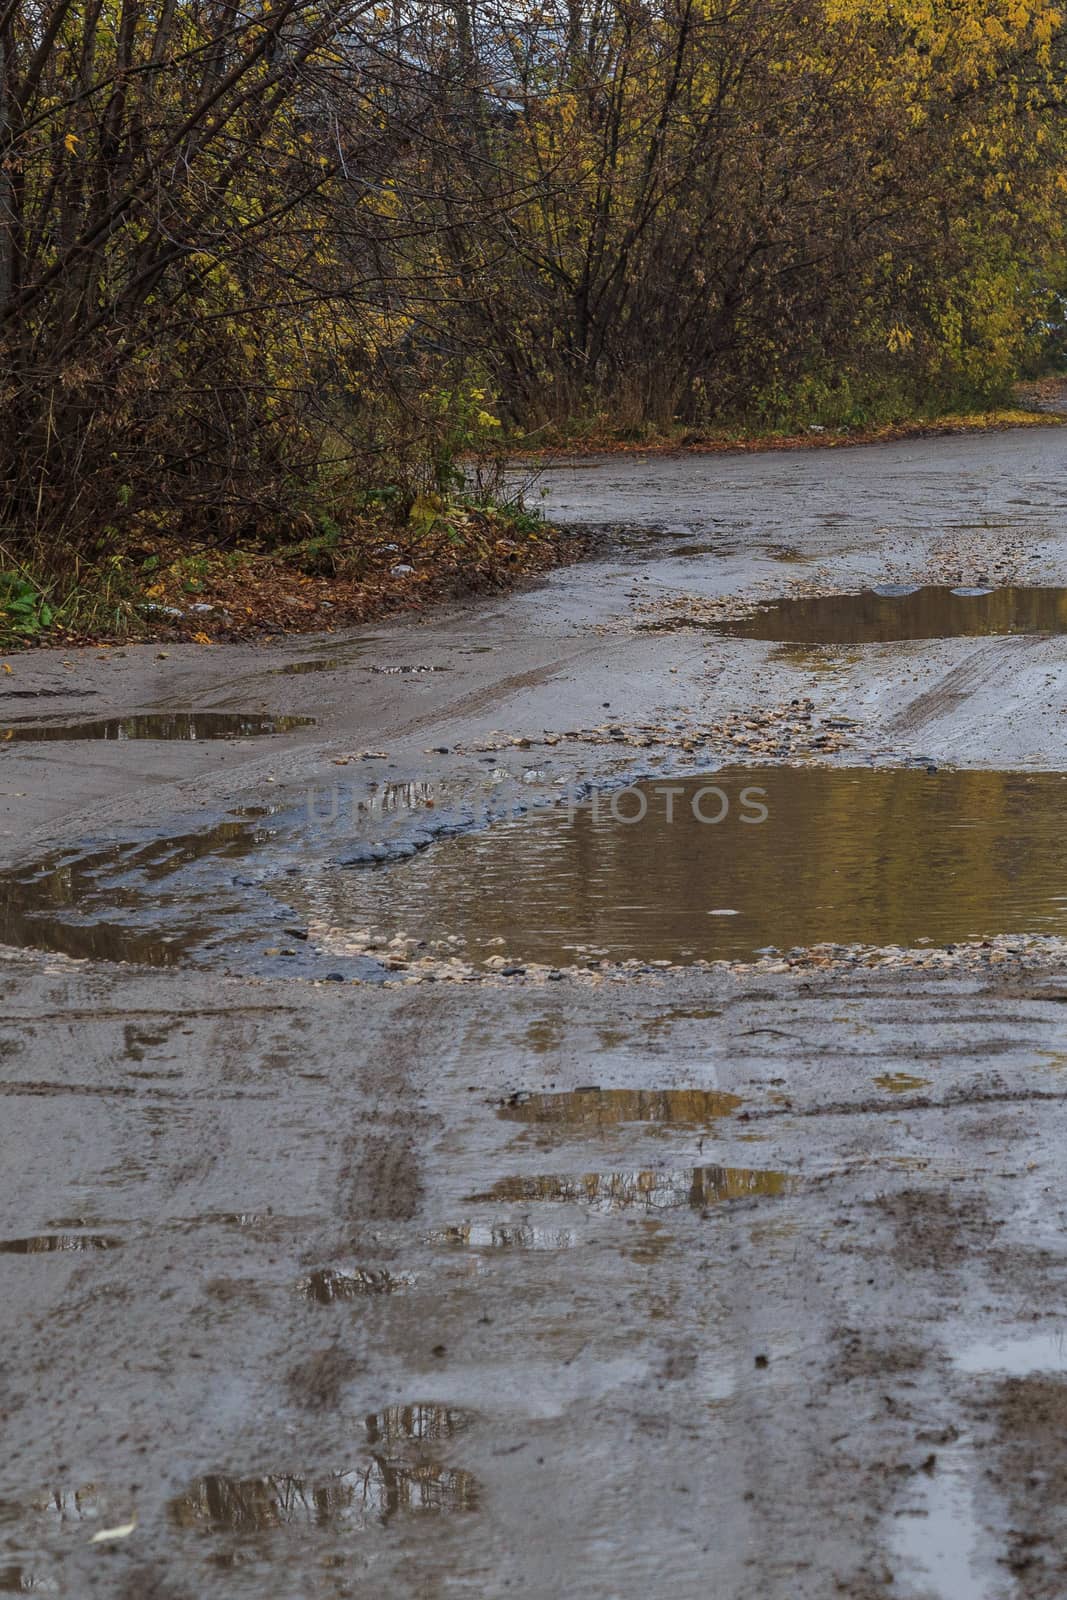 roadway in a provincial Russian city in poor condition, pits and dirt by VADIM